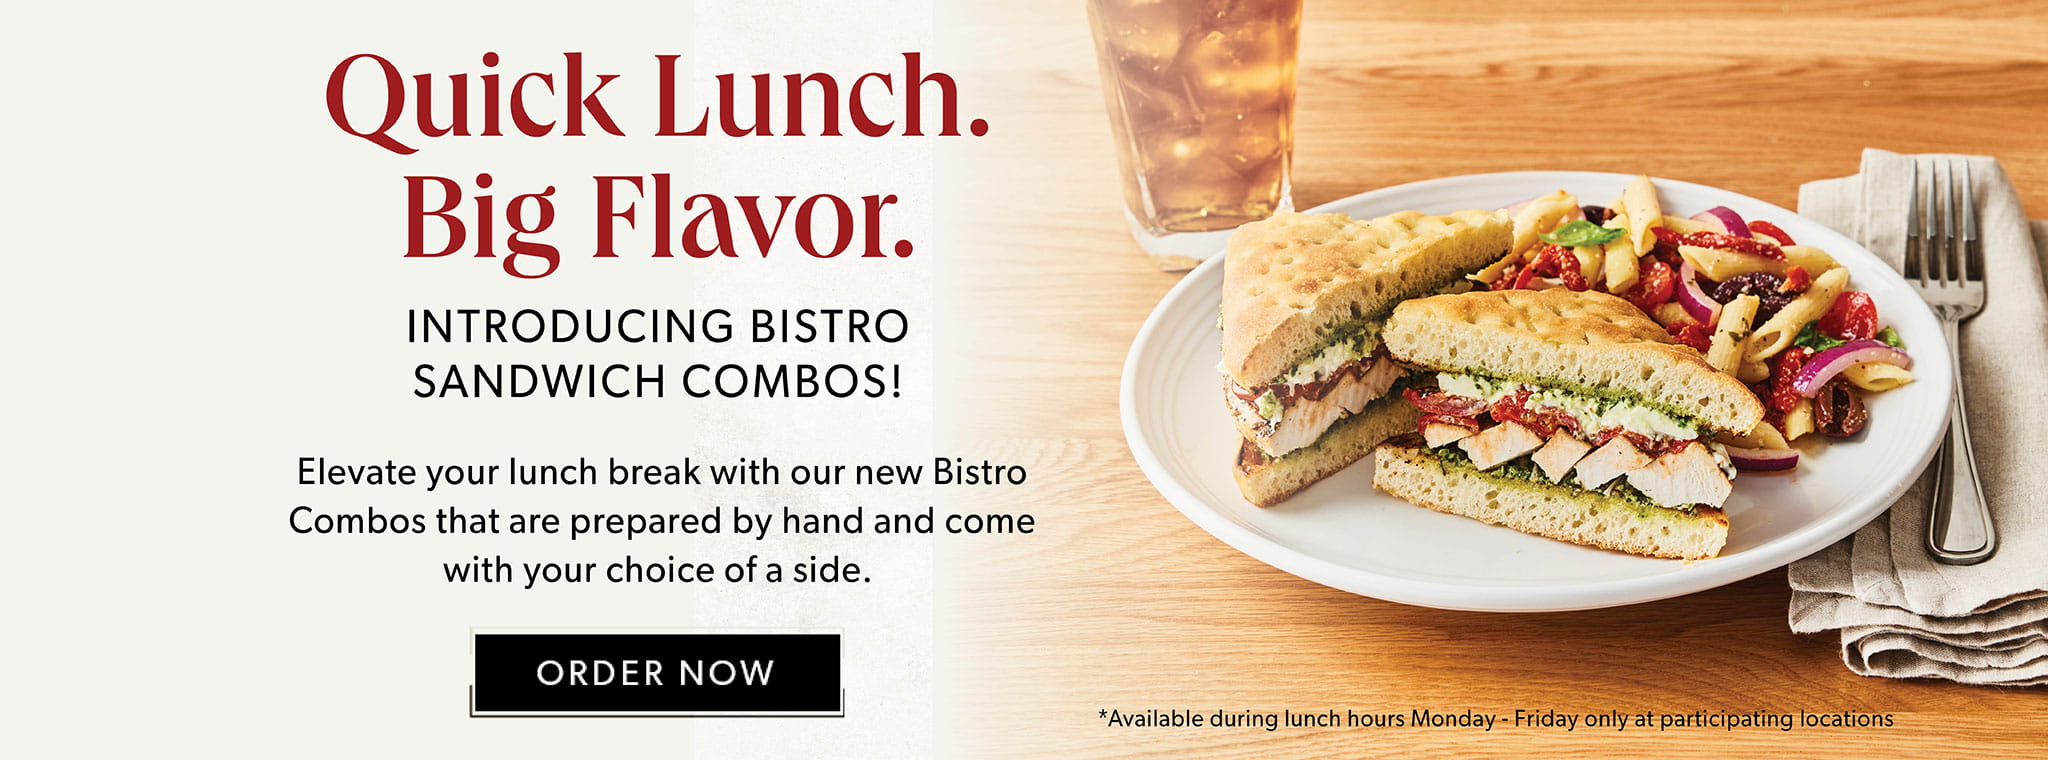 Quick Lunch. Big Flavor. Introducing Bistro Sandwich Combos! Order Now